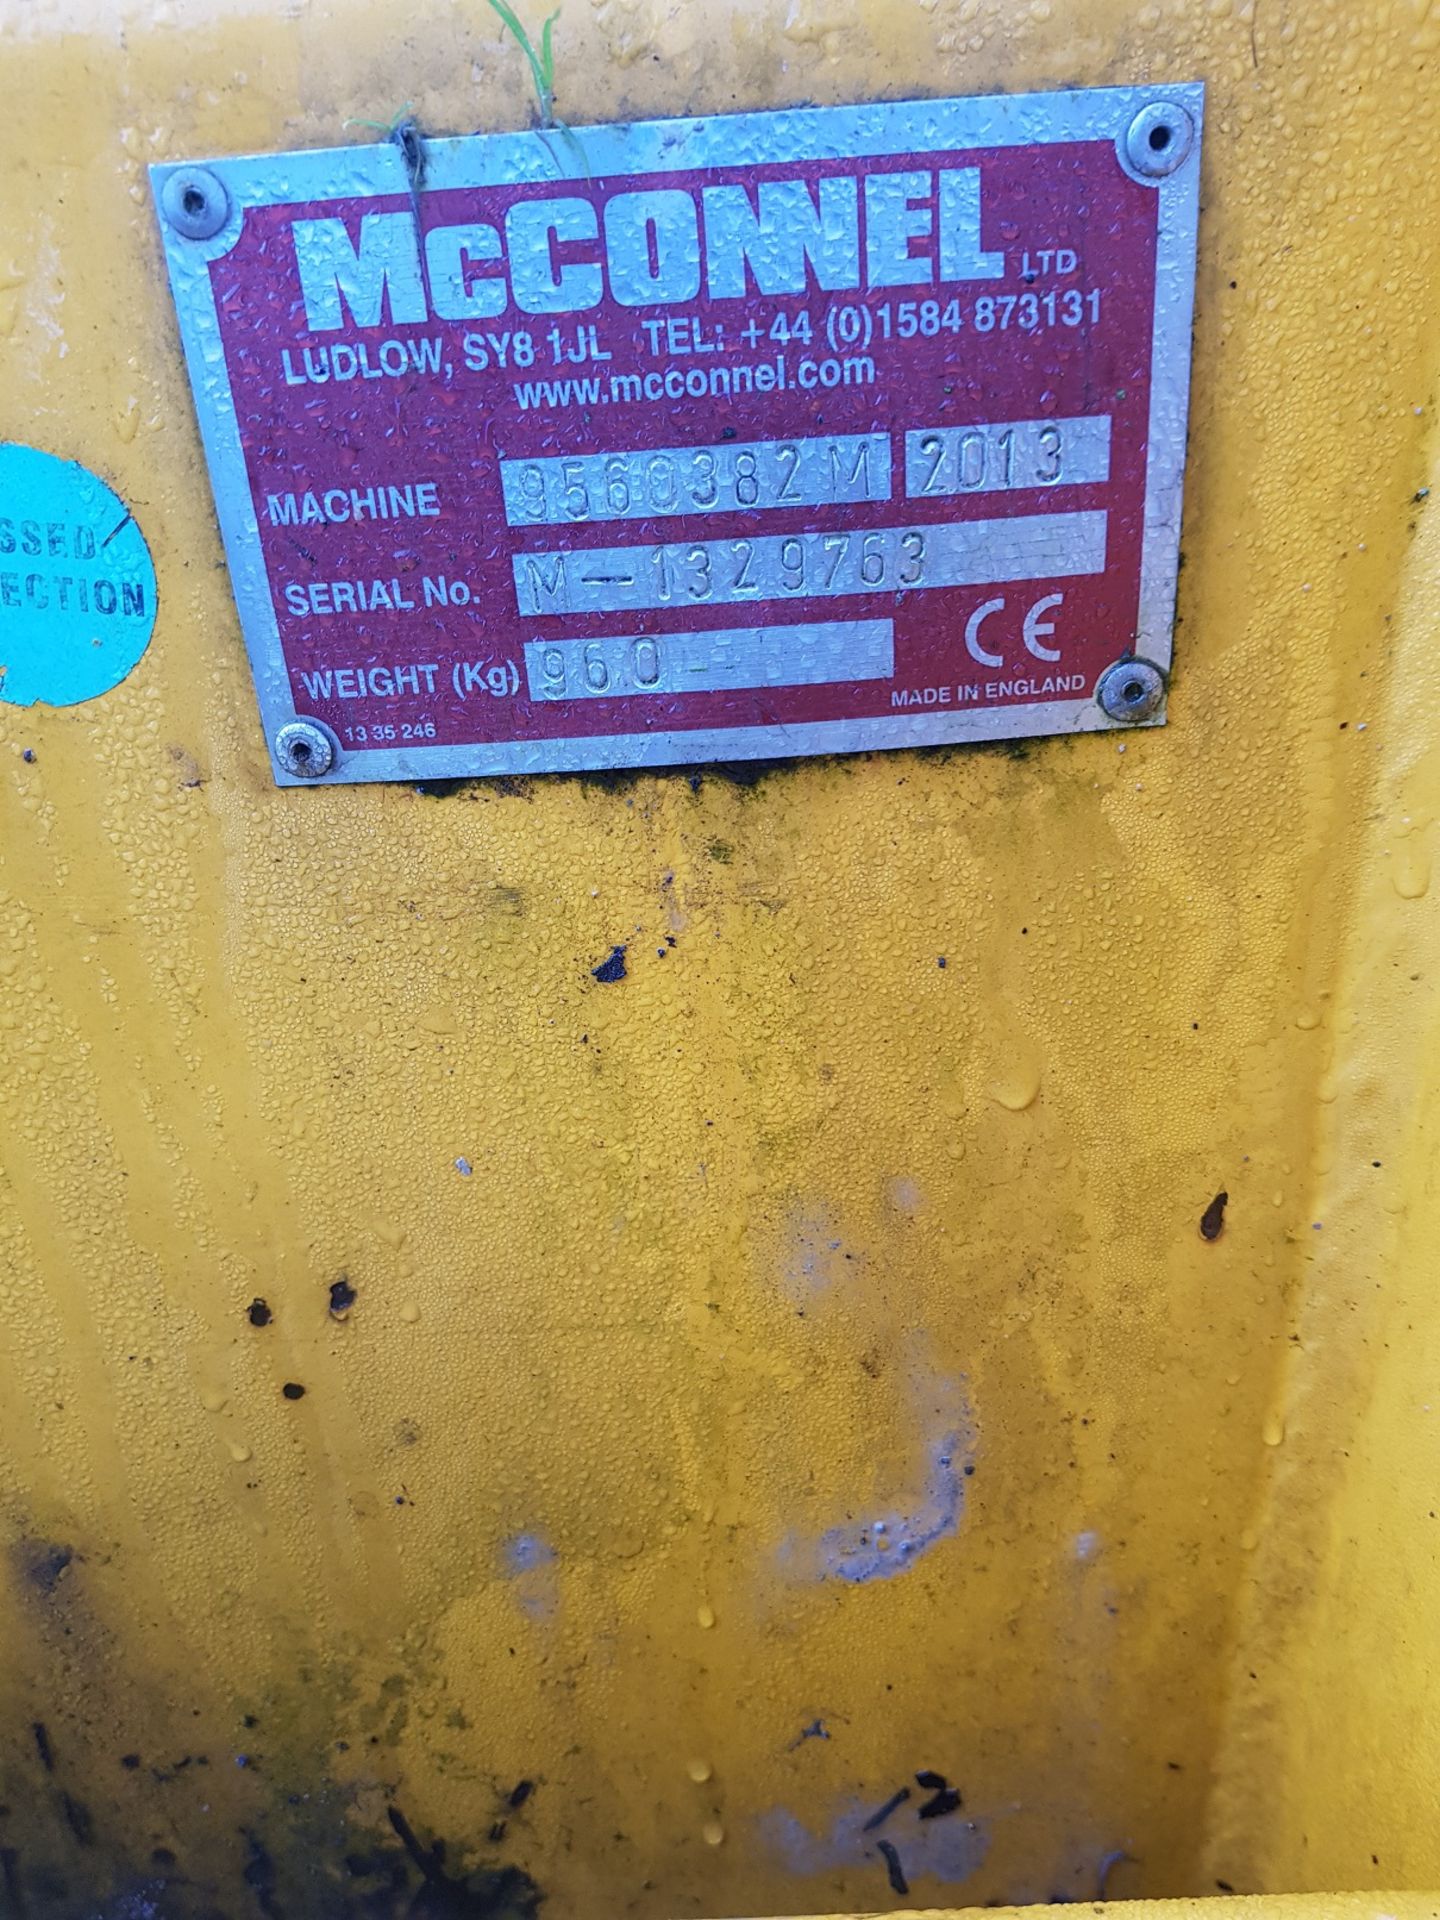 2013 McCONNEL MERLIN 2500 PTO FLAIL MOWER, WEIGHT 960KG *PLUS VAT* - Image 4 of 4